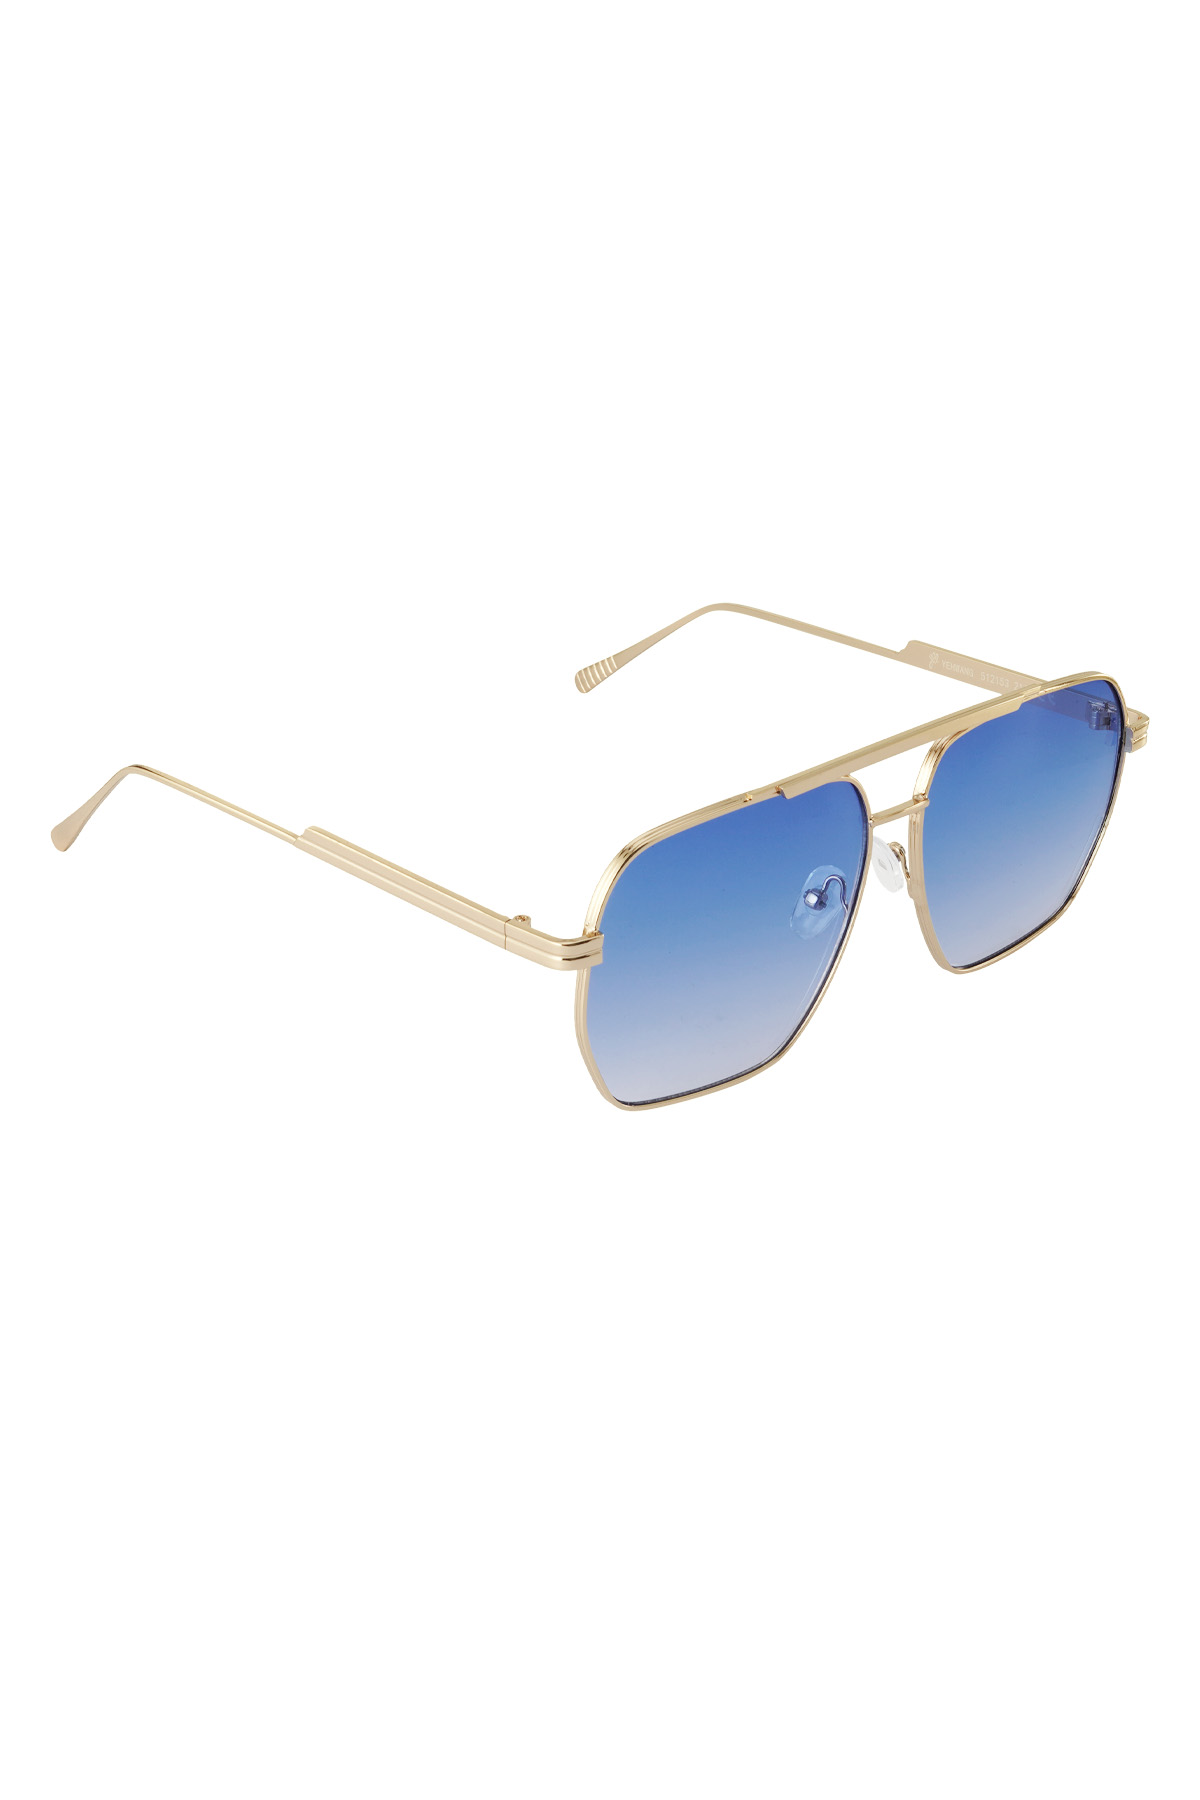 Metal summer sunglasses - Blue and gold h5 